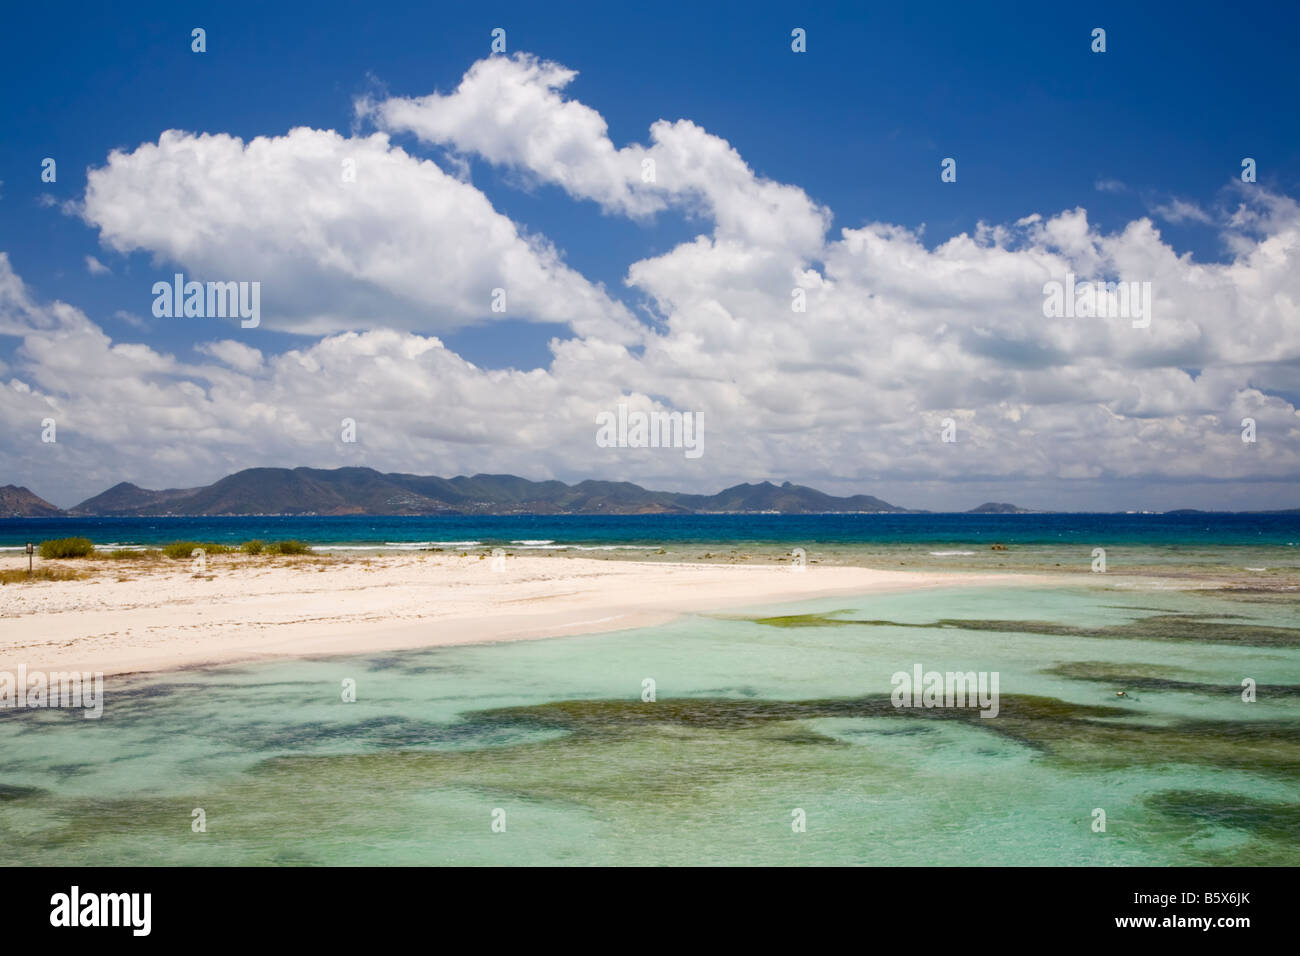 Cove Bay on the caribbean island of Anguilla in the British West Indies Stock Photo